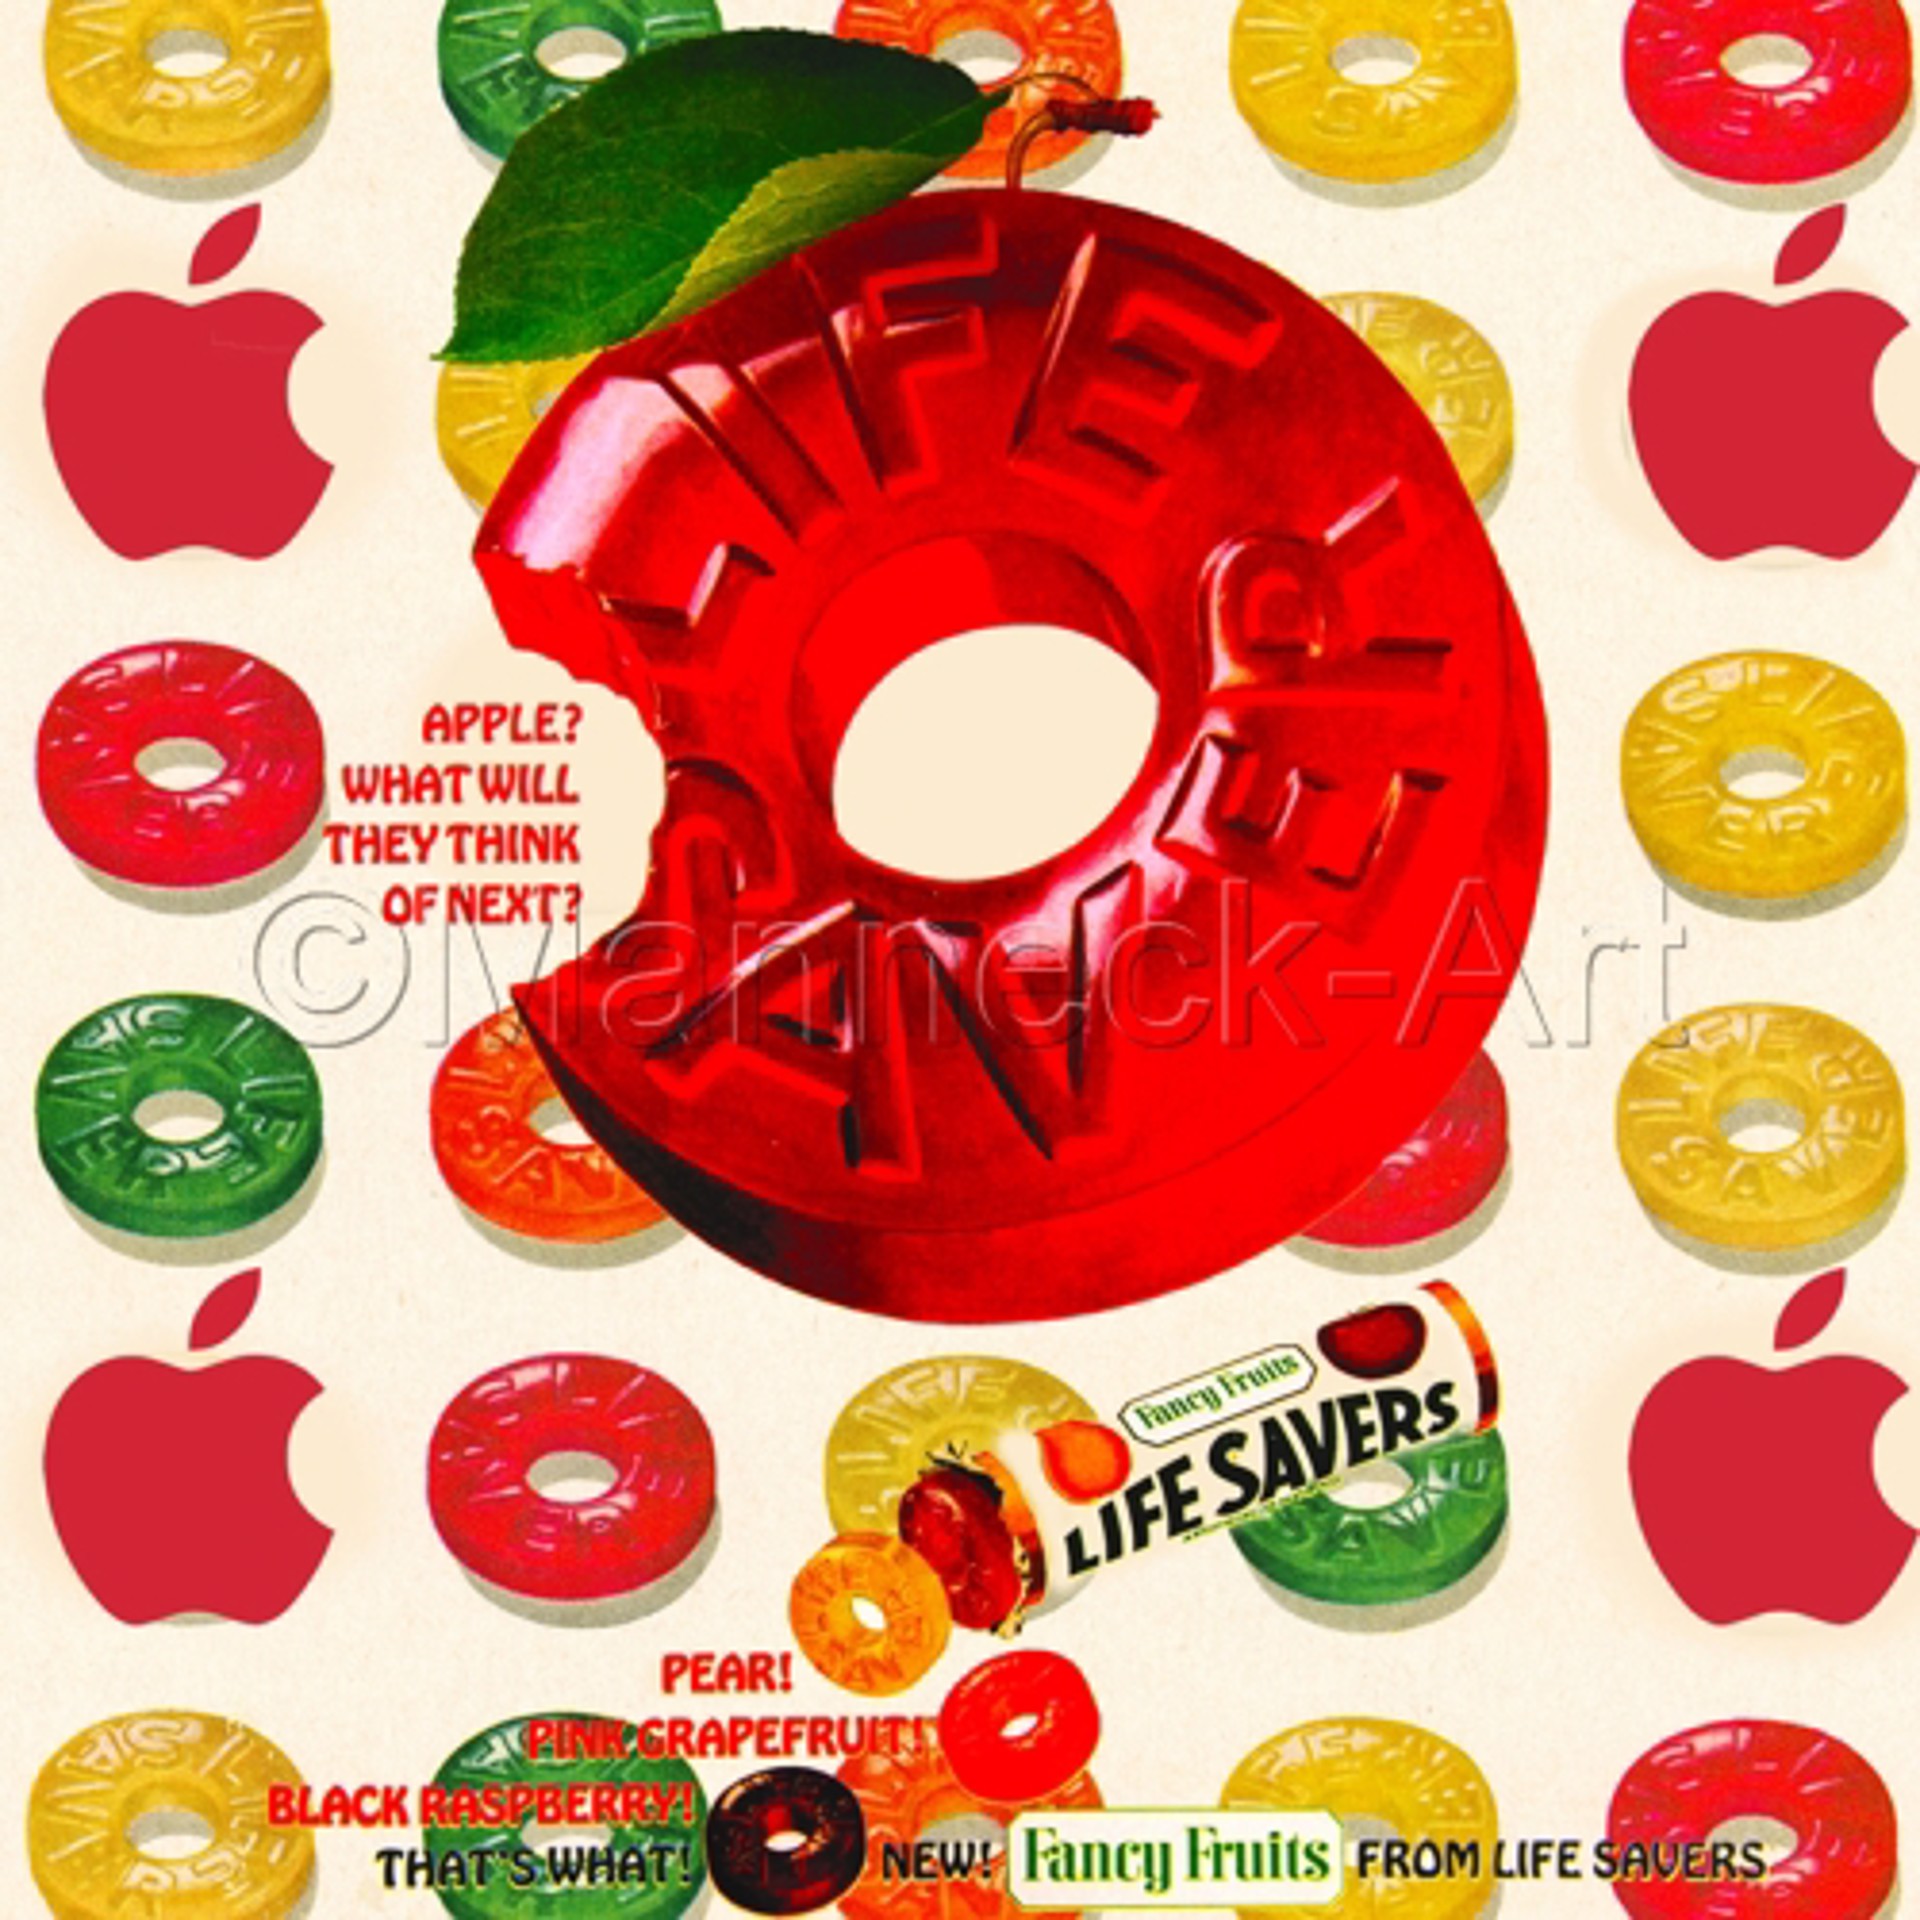 Apple What Will They Think of Next by Holly Manneck